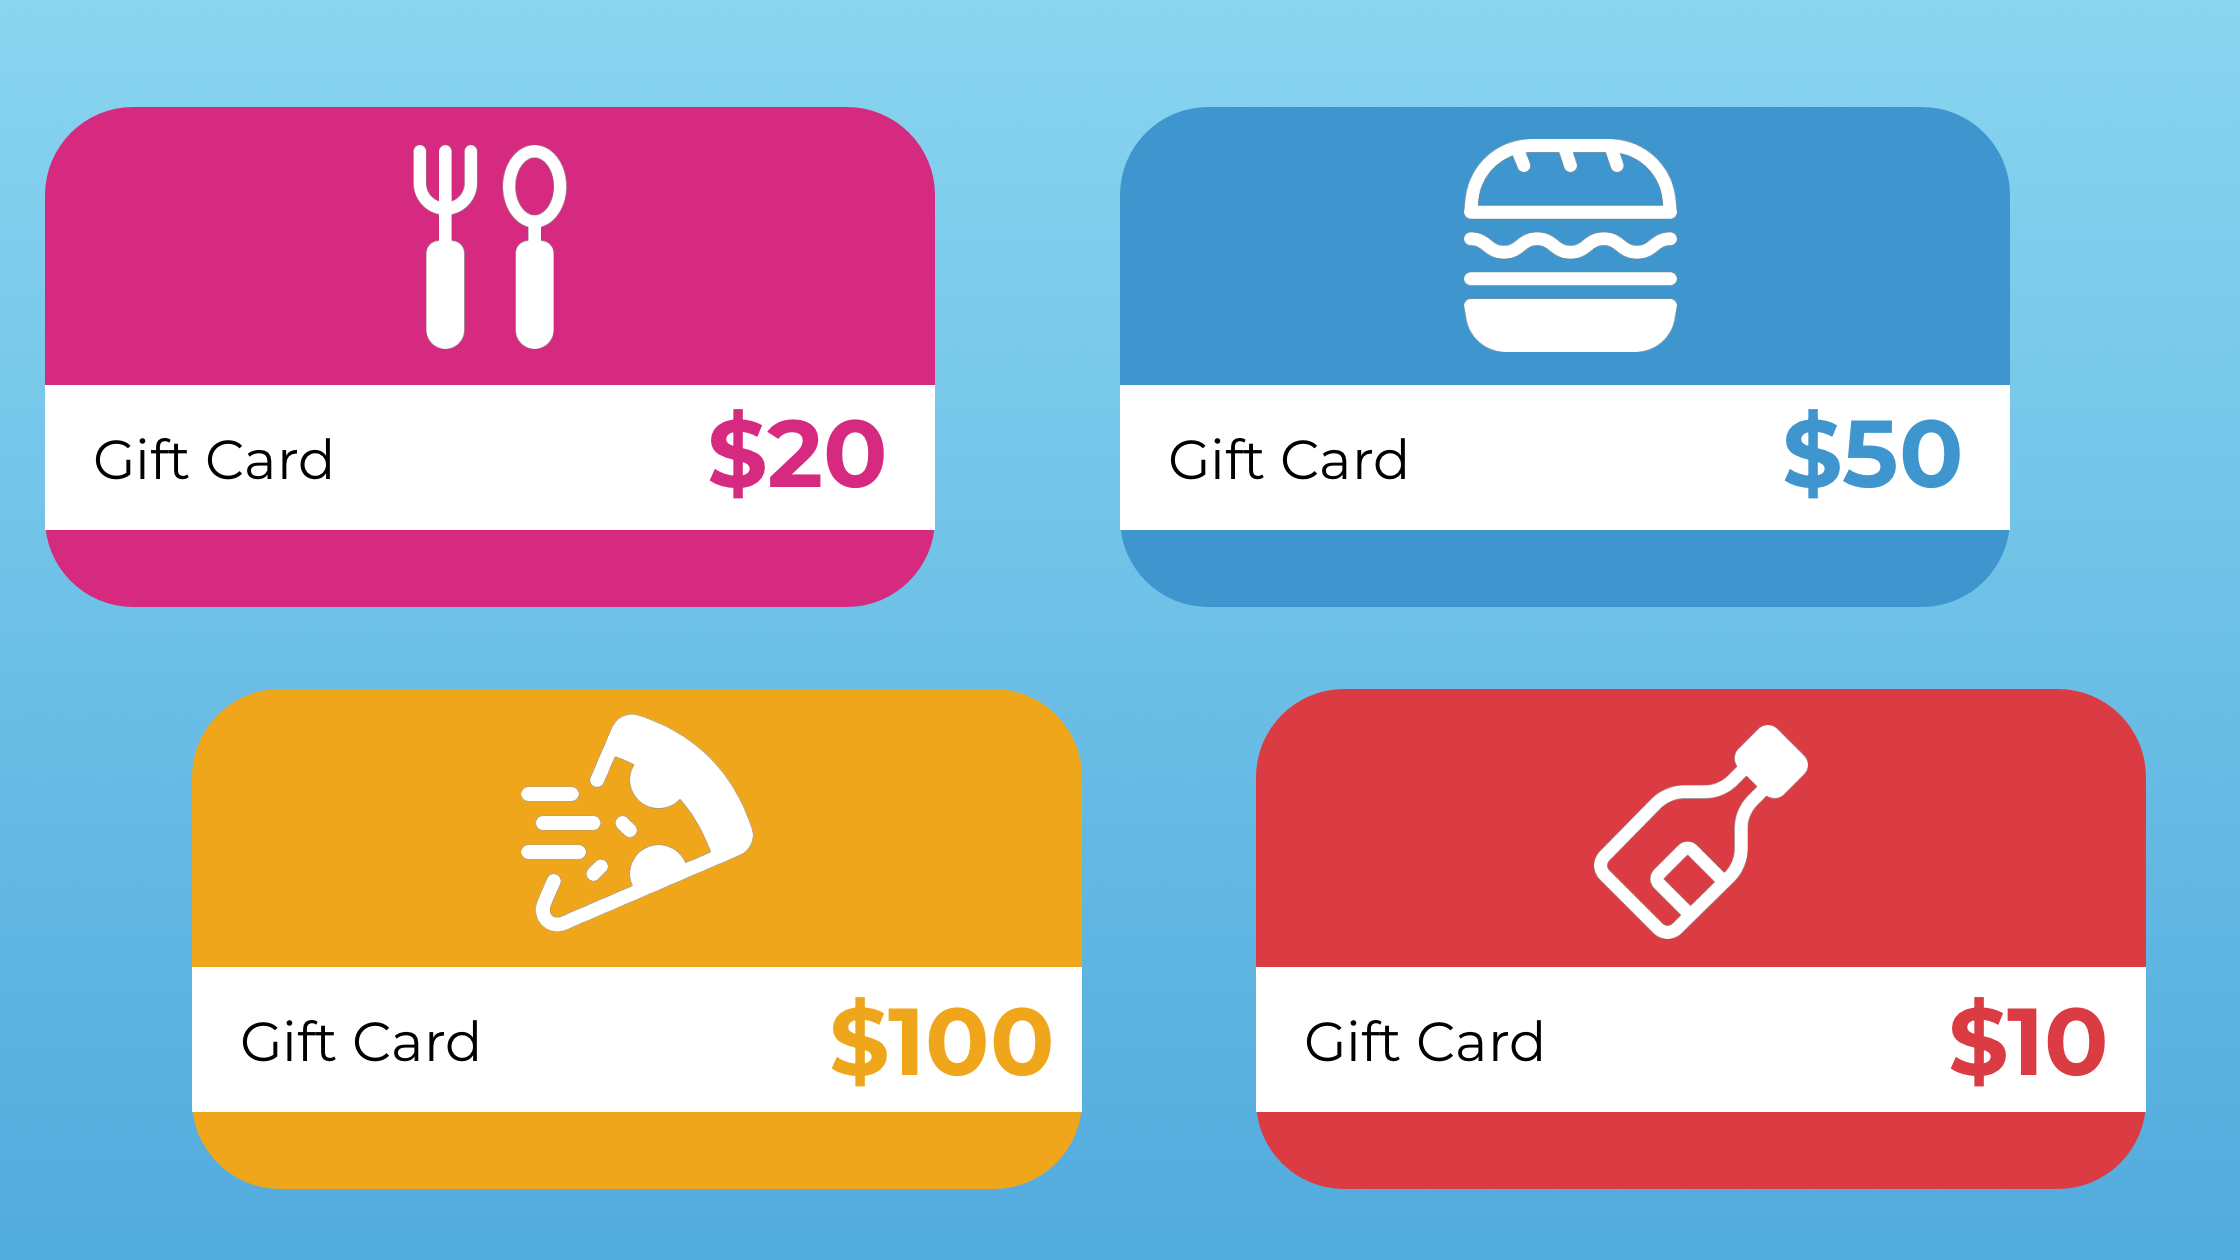 The value restaurant gift cards bring to your brand